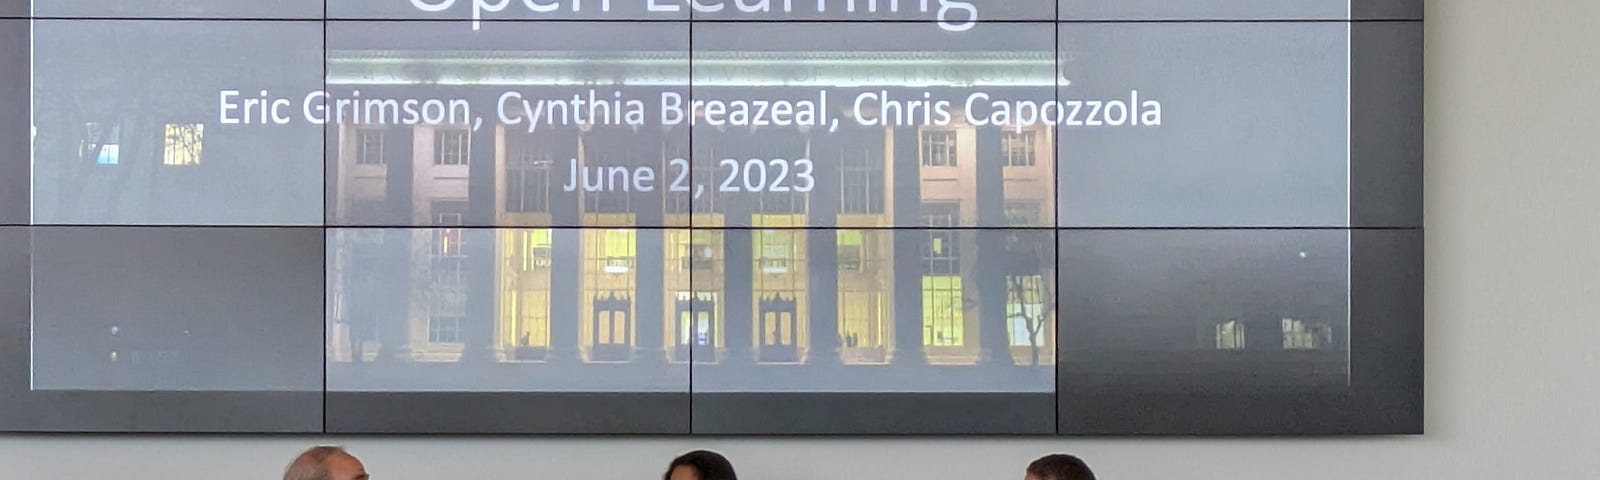 Three people seated in front of an audience, in front of a screen that says Open Learning, Eric Grimson, Cynthia Breazeal, Chris Capozzola, June 2, 2023